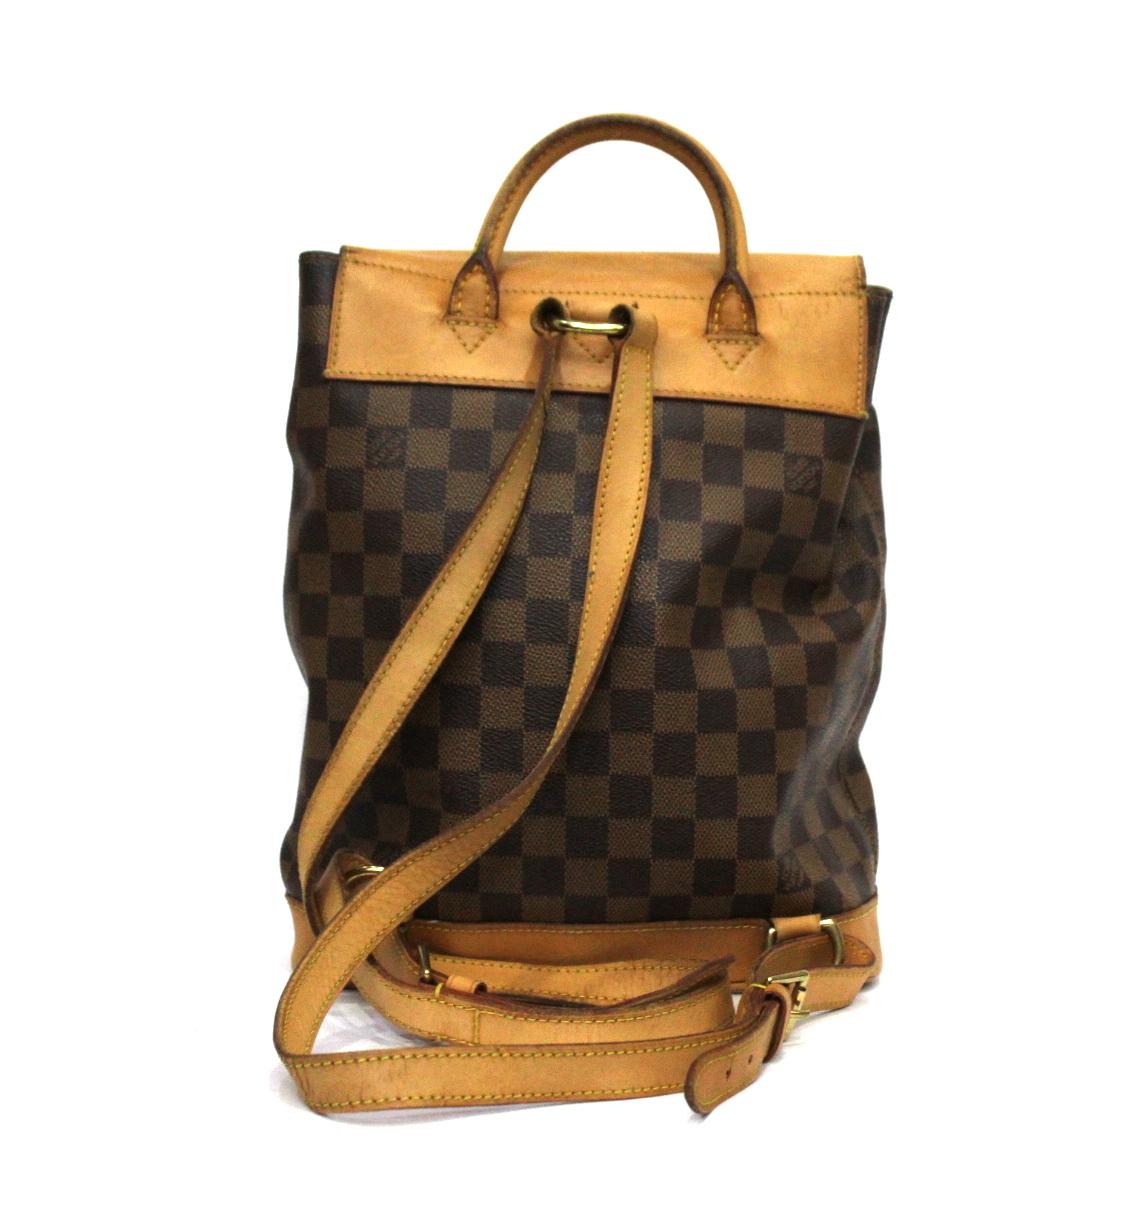 The Louis Vuitton Damier Canvas Soho Backpack Bag is great for ultimate hands-free convenience. This particular bag was the first line of Damier Canvas in the reintroduction of Damier Canvas in 1996 as Louis Vuitton celebrated their 100 year